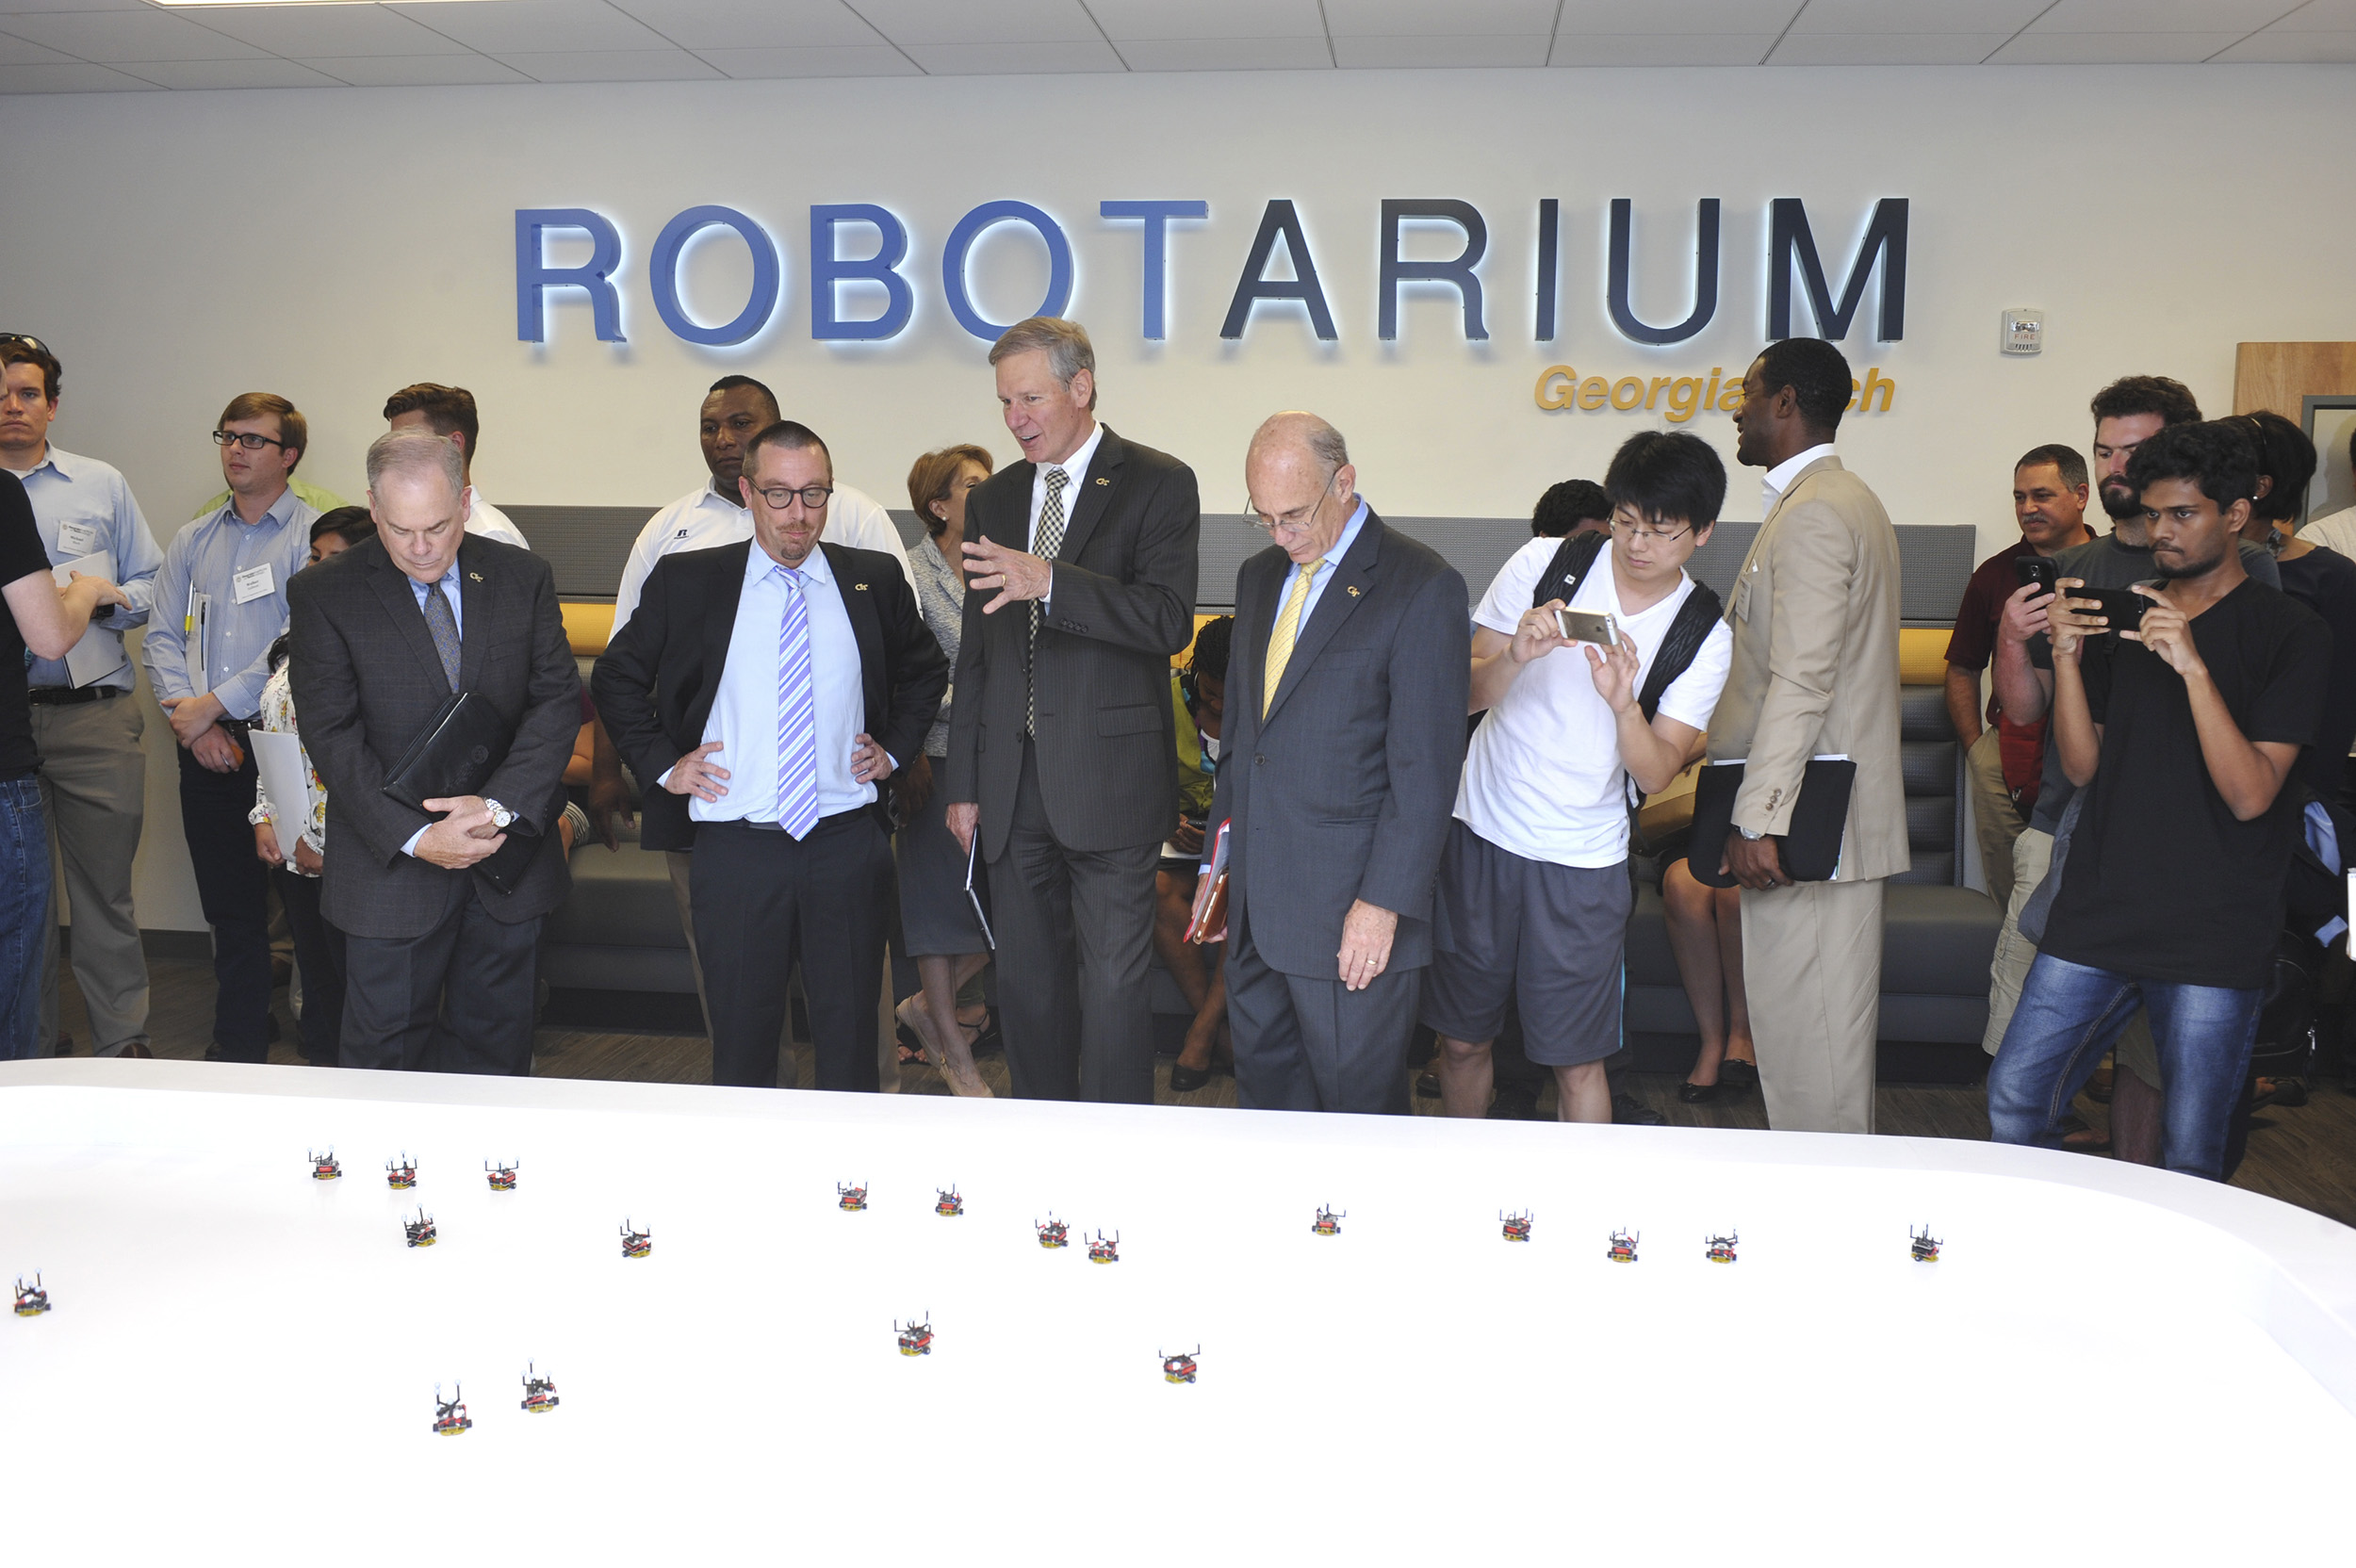 Left to right: Steve Cross, Magnus Egerstedt, G.P. "Bud" Peterson and Rafael Bras watch a robot demo at the Robotarium.